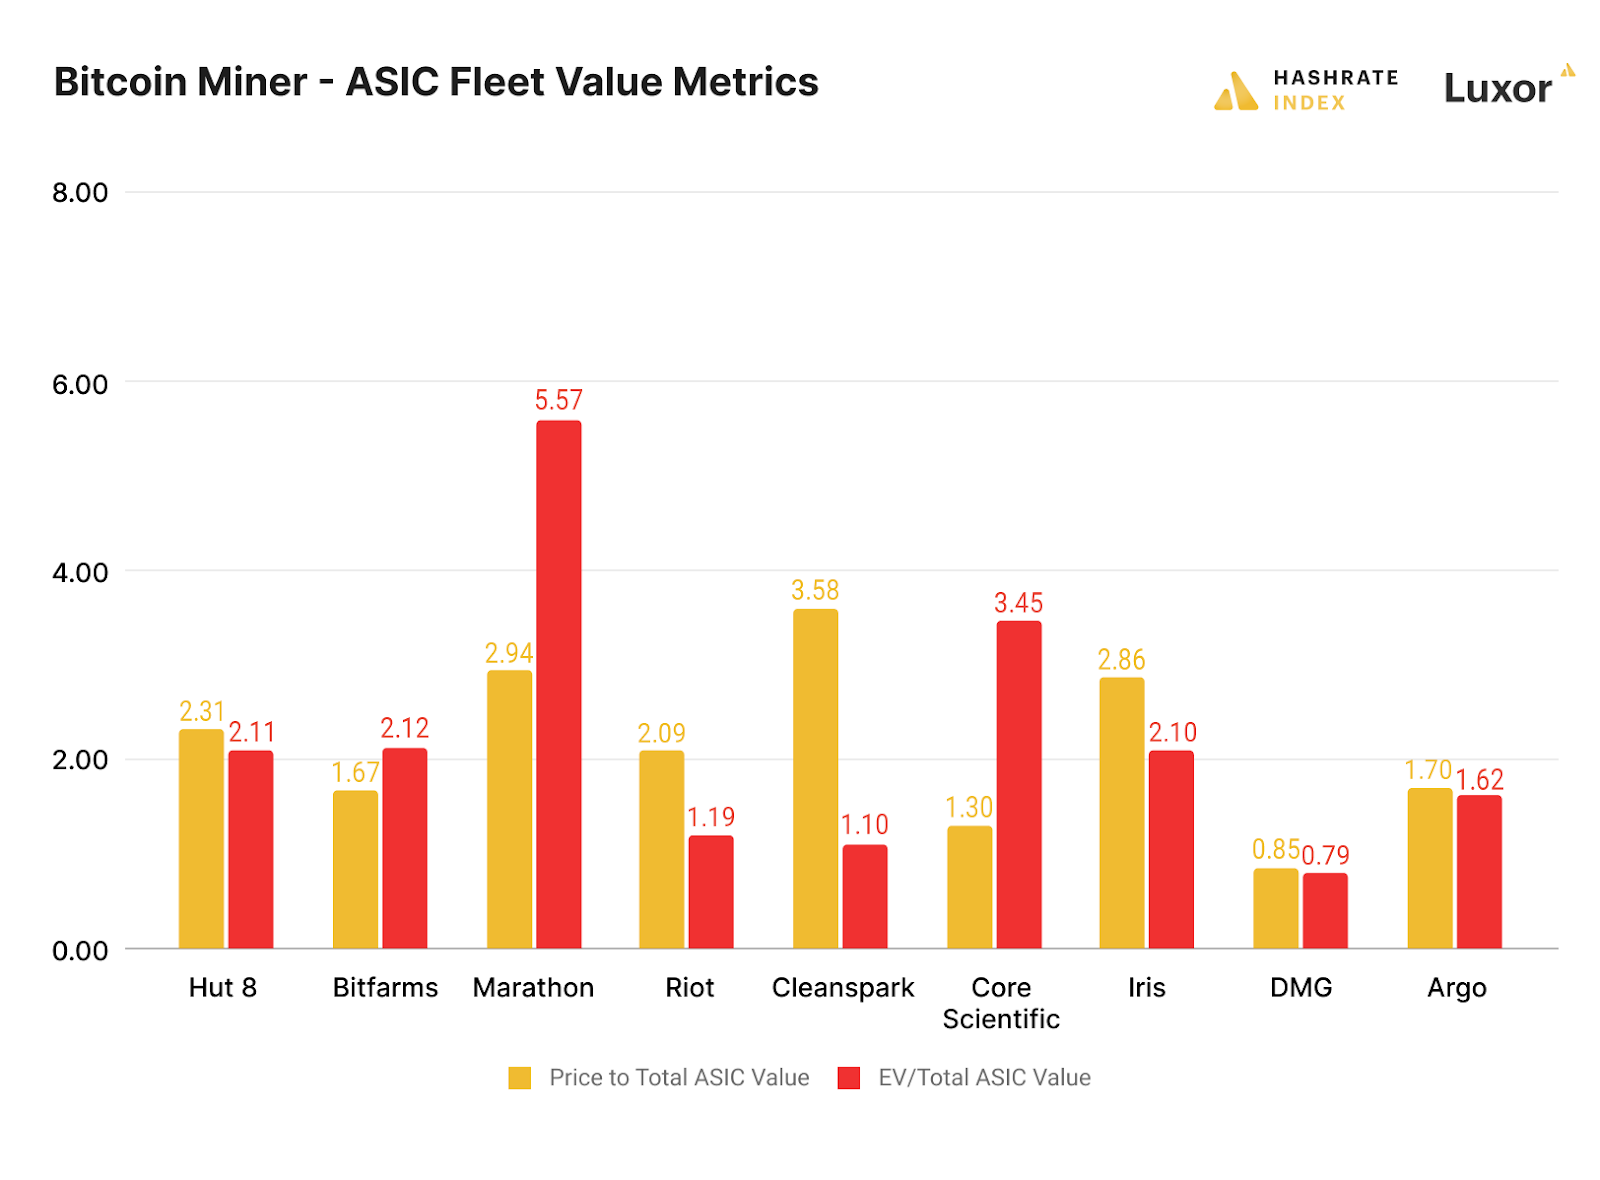 A low Enteprise Value / ASIC Value ratio means that a bitcoin mining stock holds less debt per unit of hashrate, while a high EV / ASIC value ratio indicates the opposite | Source: Hashrate Index, public miner disclosures 